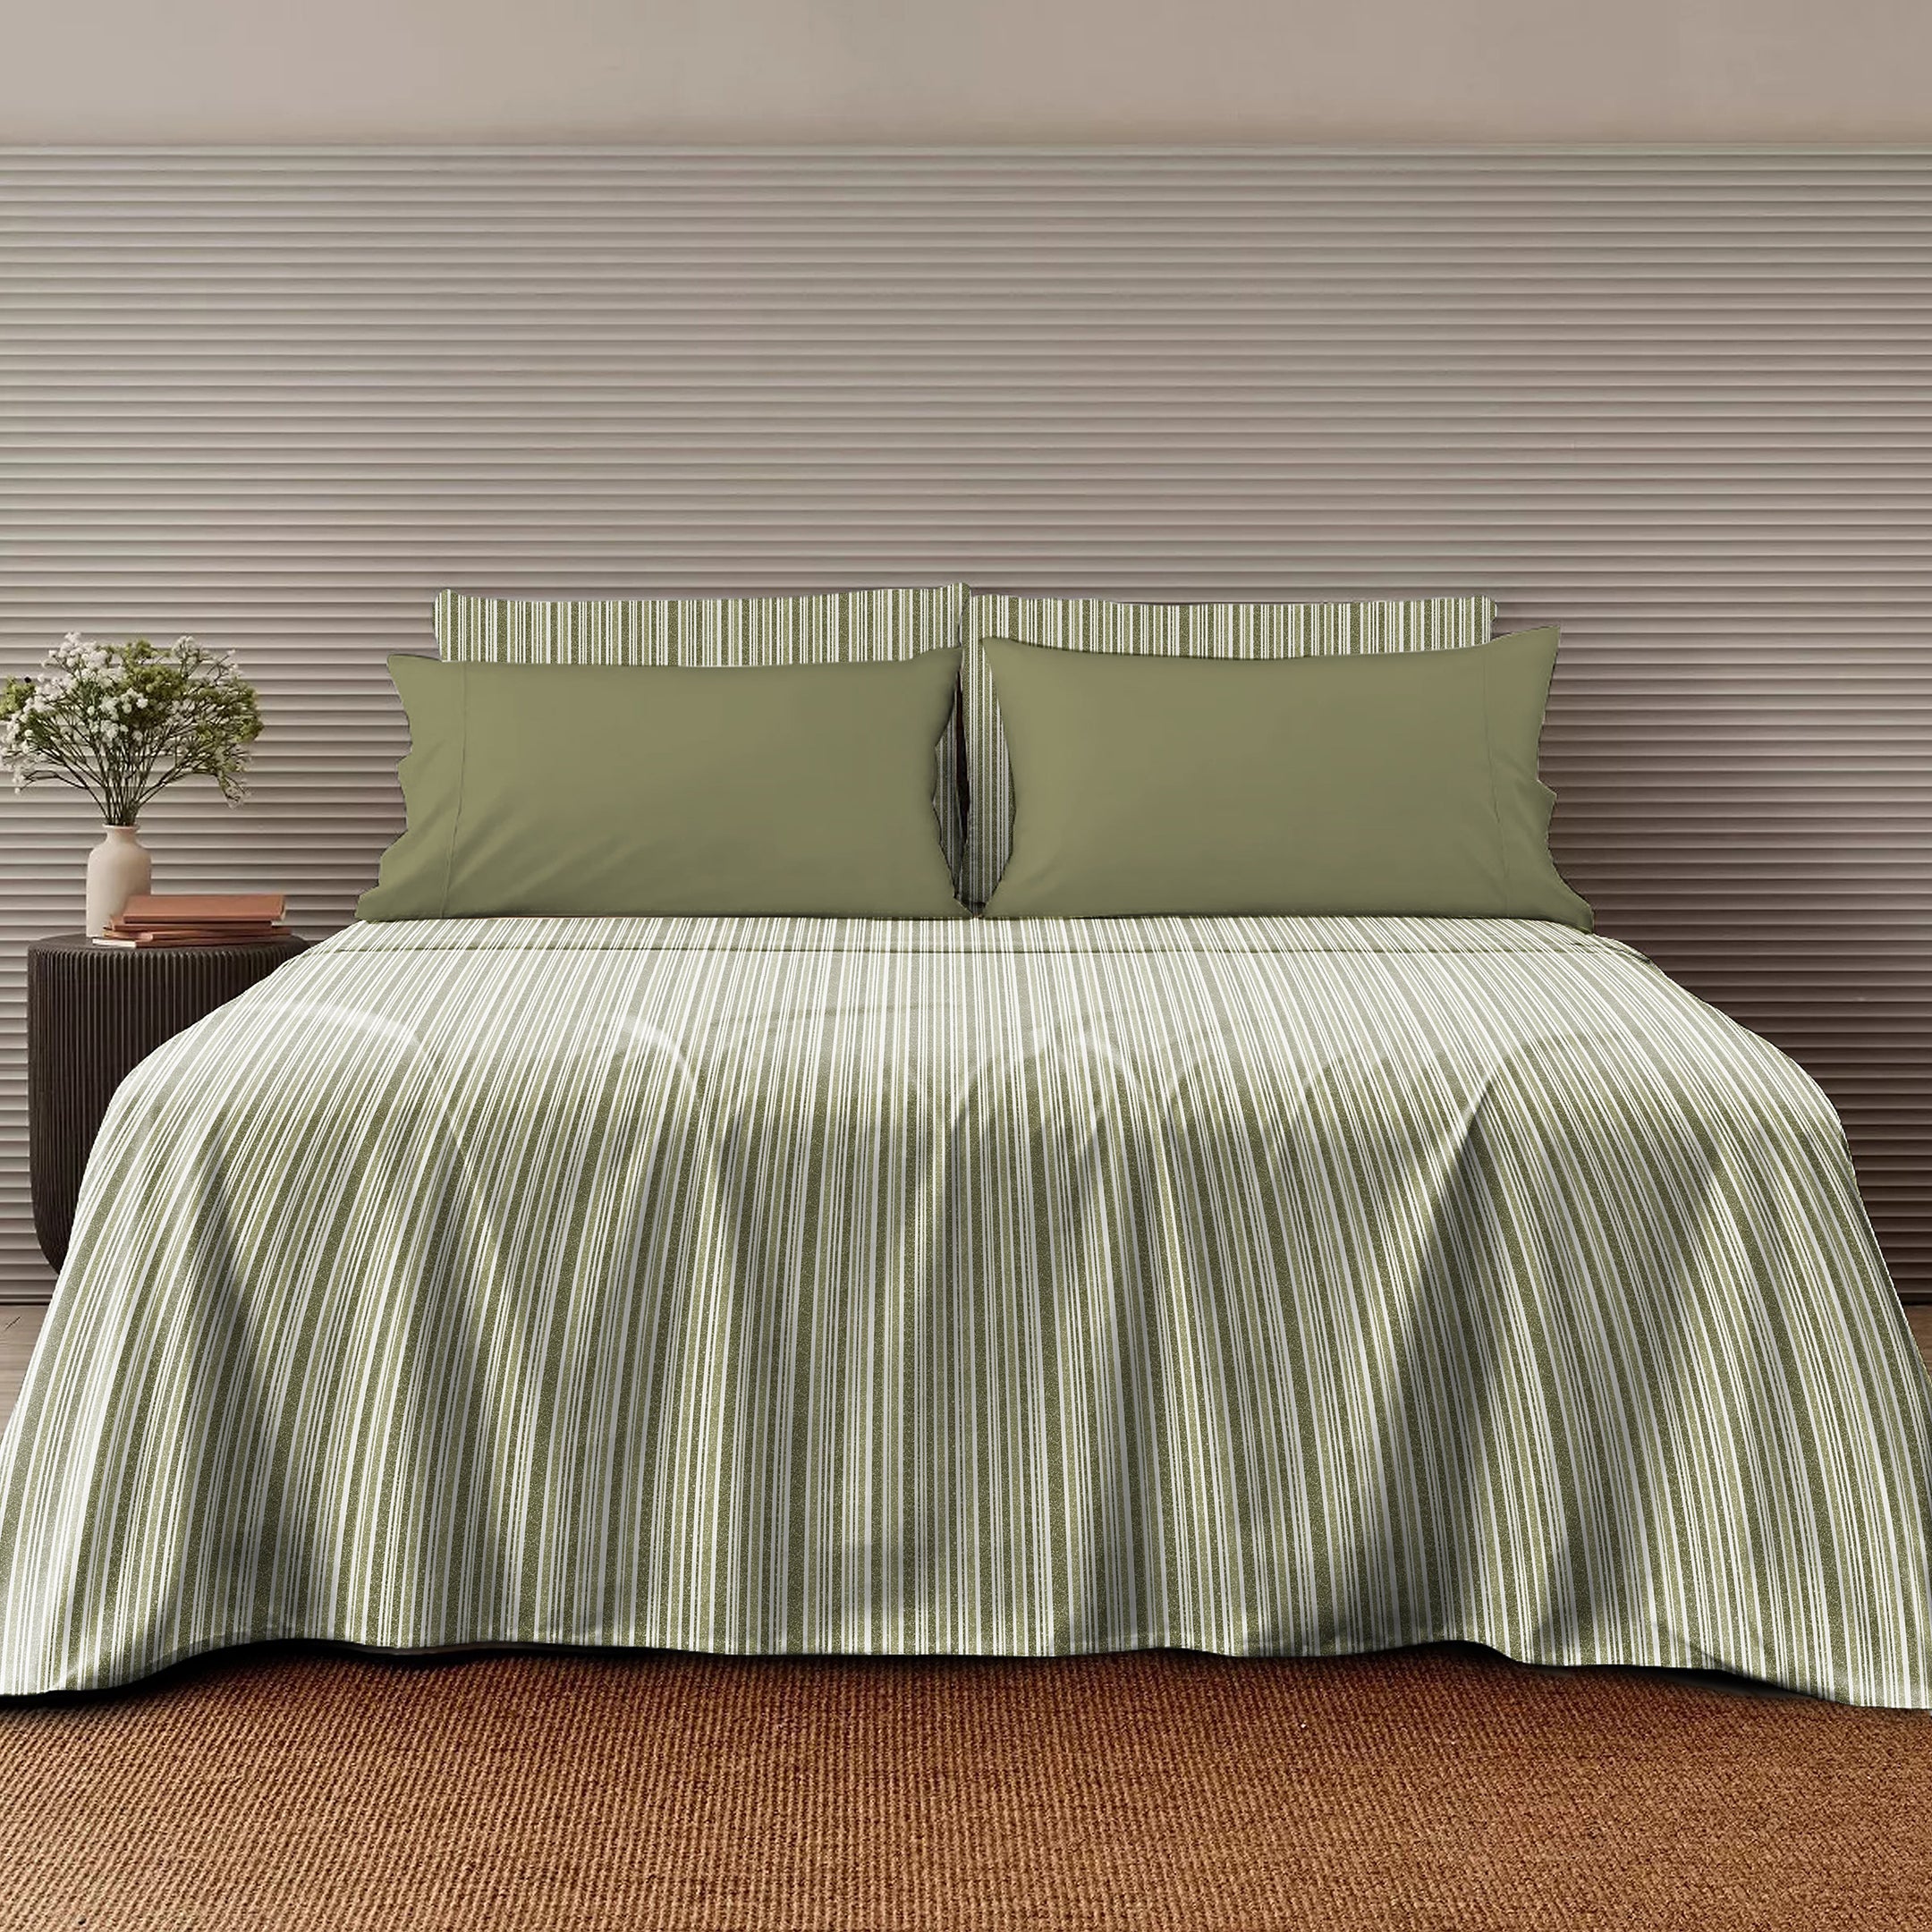 Jodhpur Stripe Bedsheet For Double Bed With 2 PillowCovers King Size (104" X 90") Olive